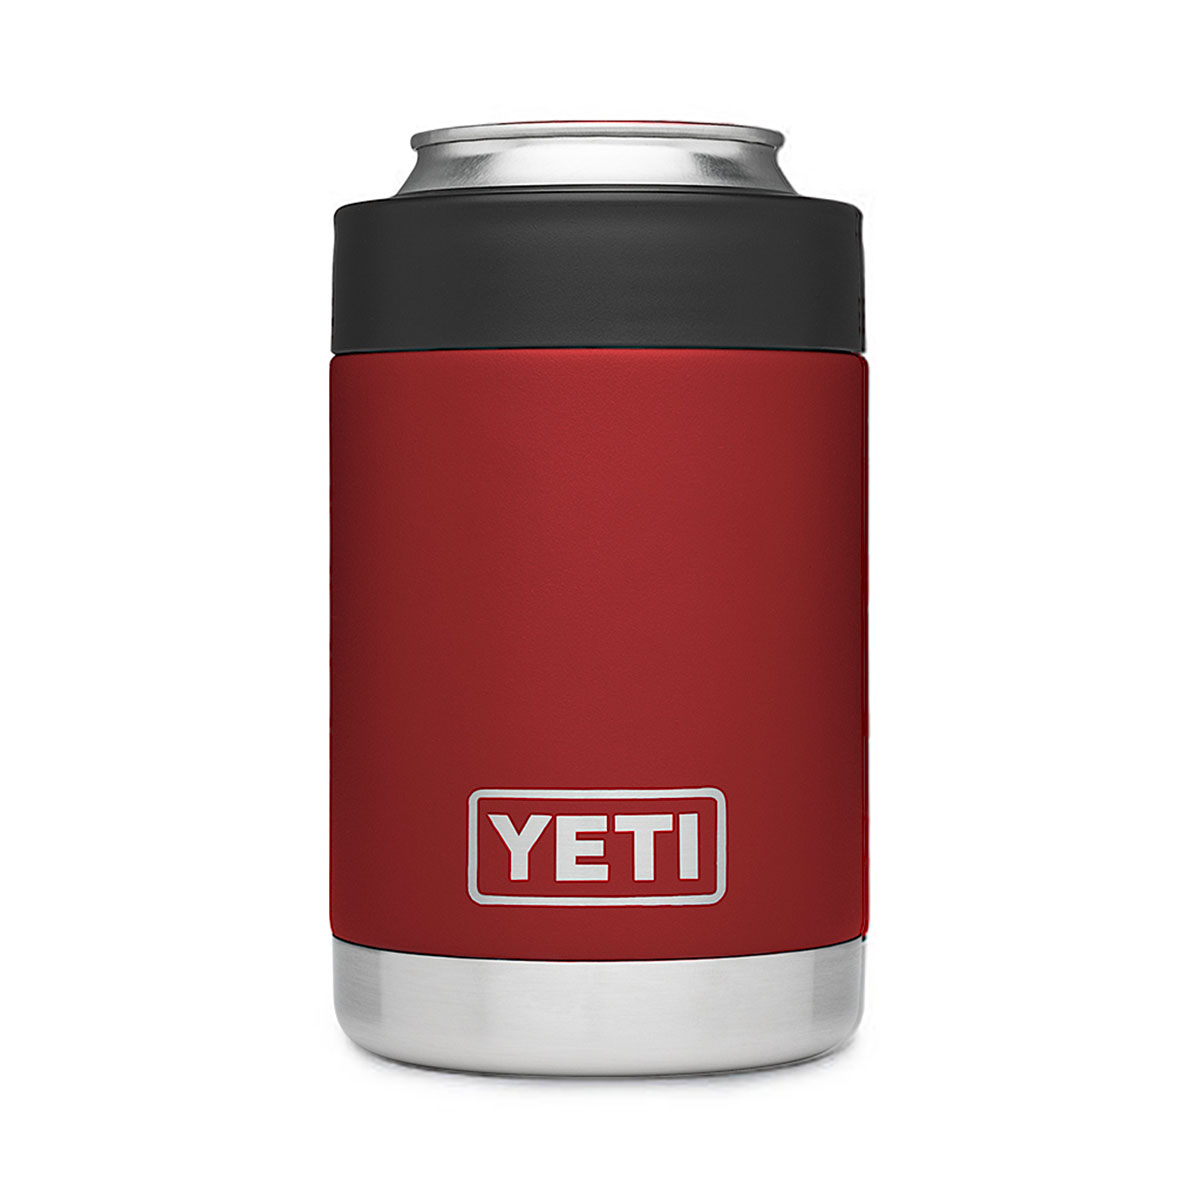 https://beerclubgift.com/assets/images/gifts/yeti-colster-can-bottle-cooler/main/yeti-colster-can-bottle-cooler_1200.jpg